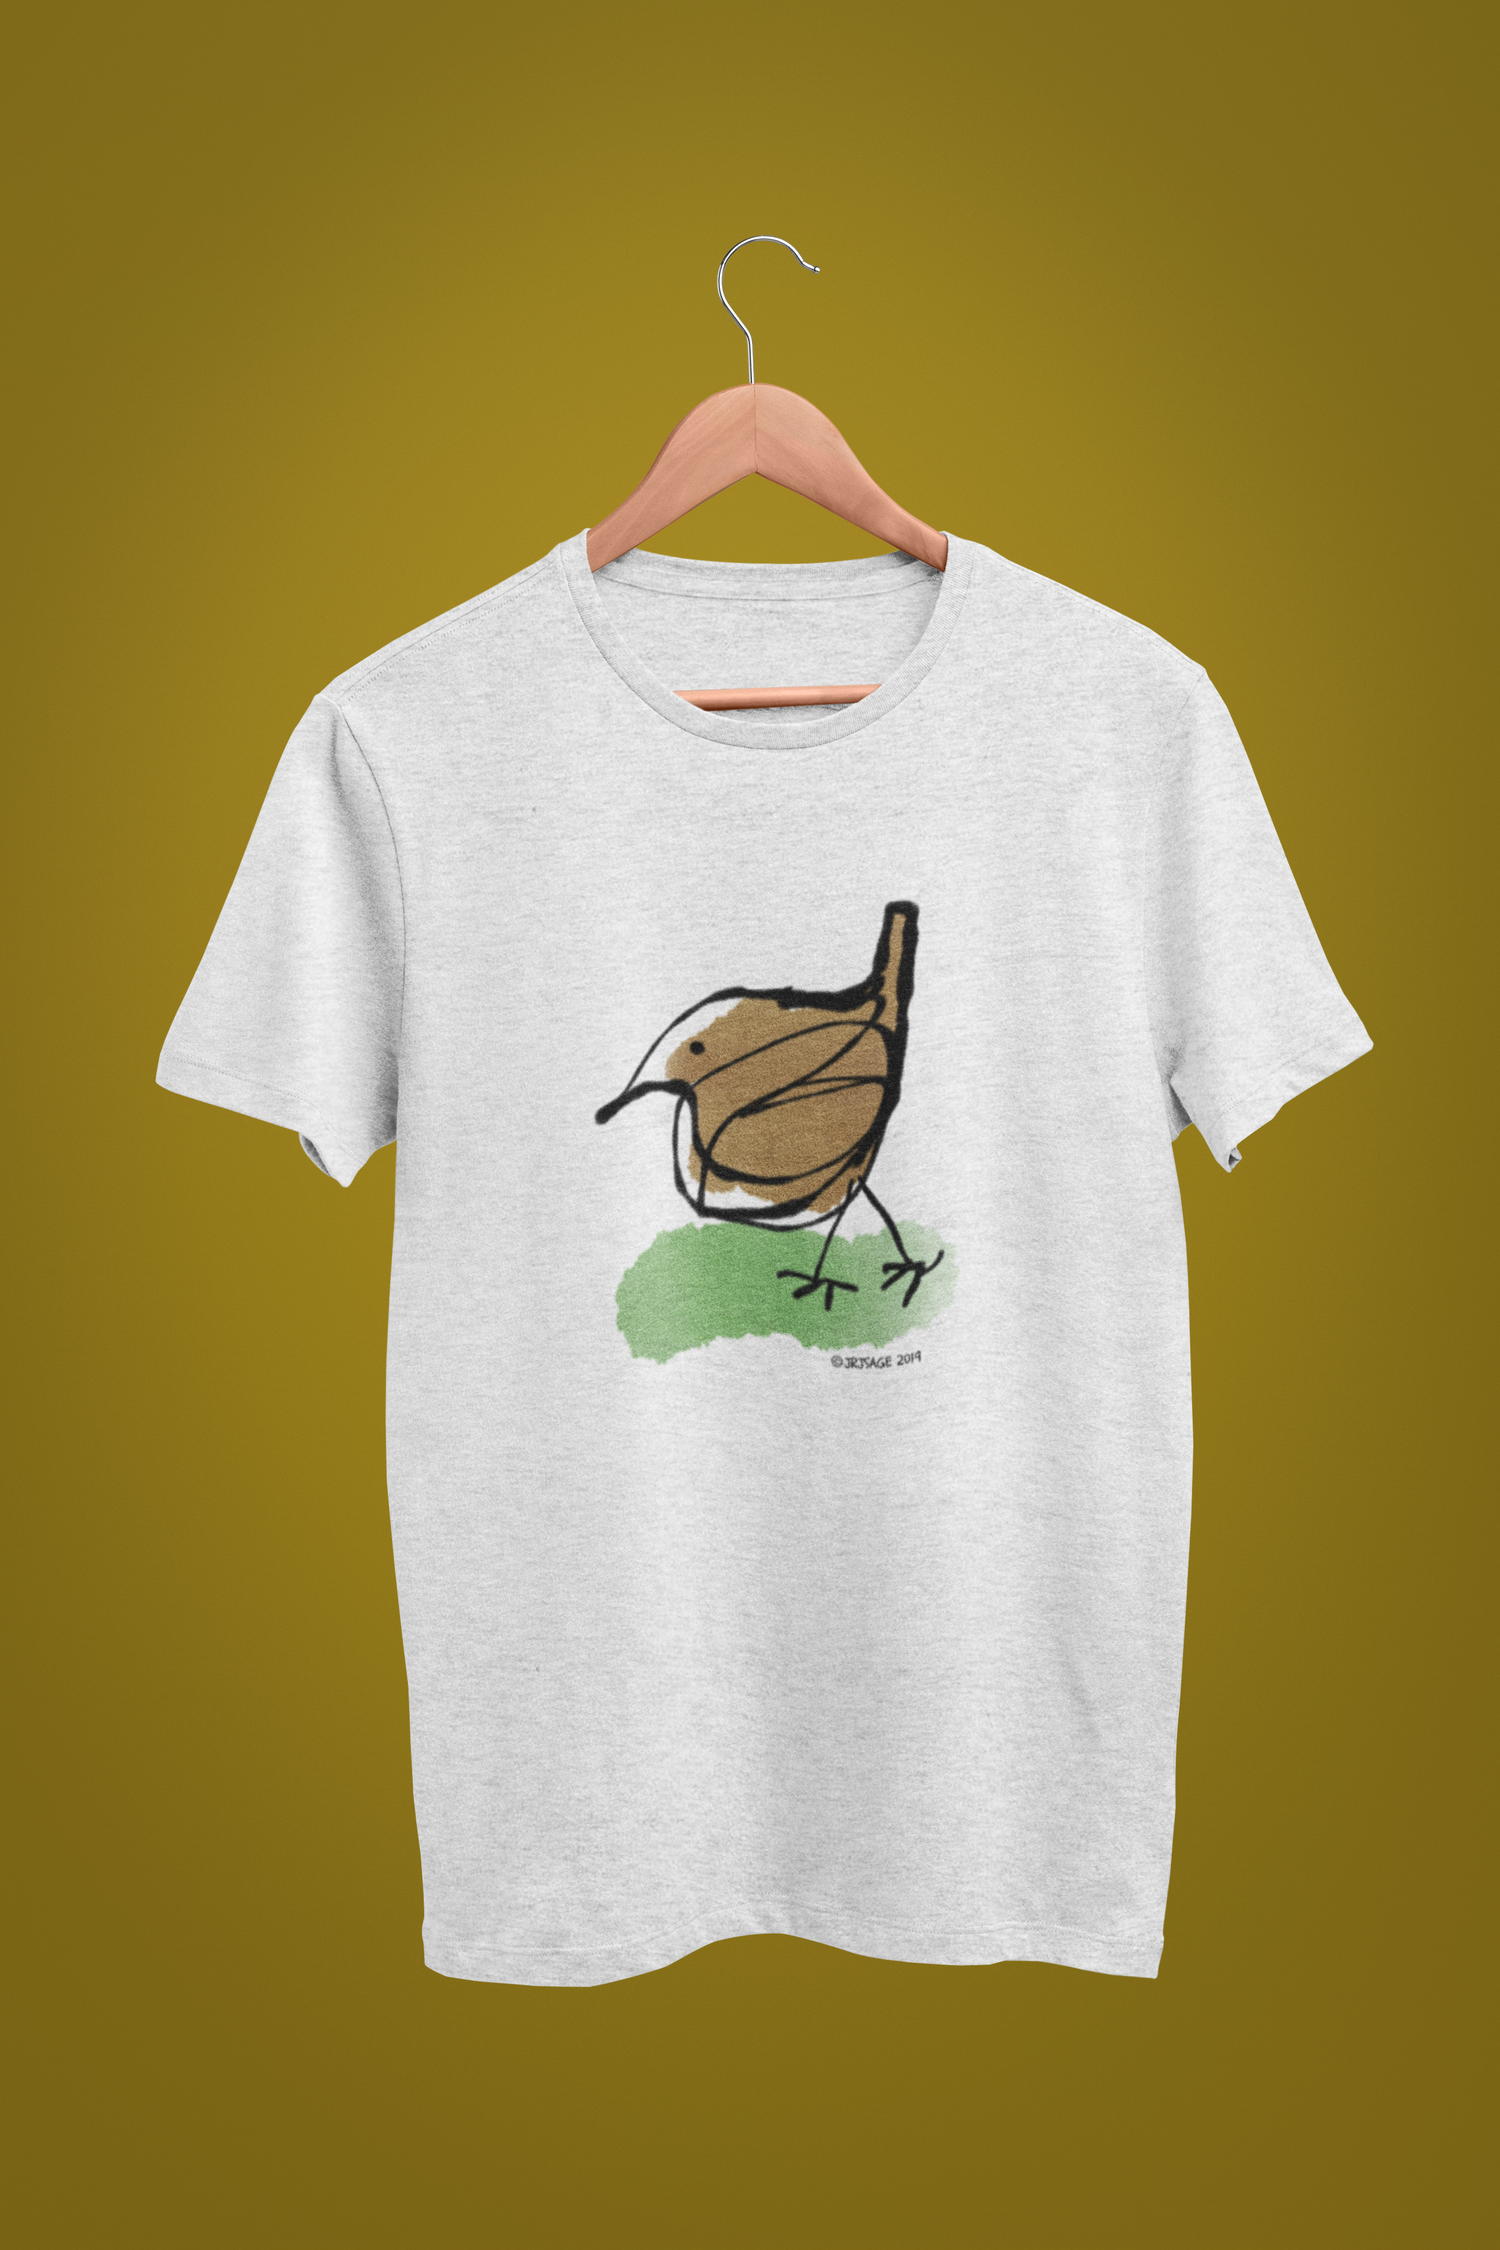 Jenny Wren T-shirt - Ilustrated little Jenny Wren bird t-shirts on cream heather grey colour vegan cotton t-shirts by Hector and Bone